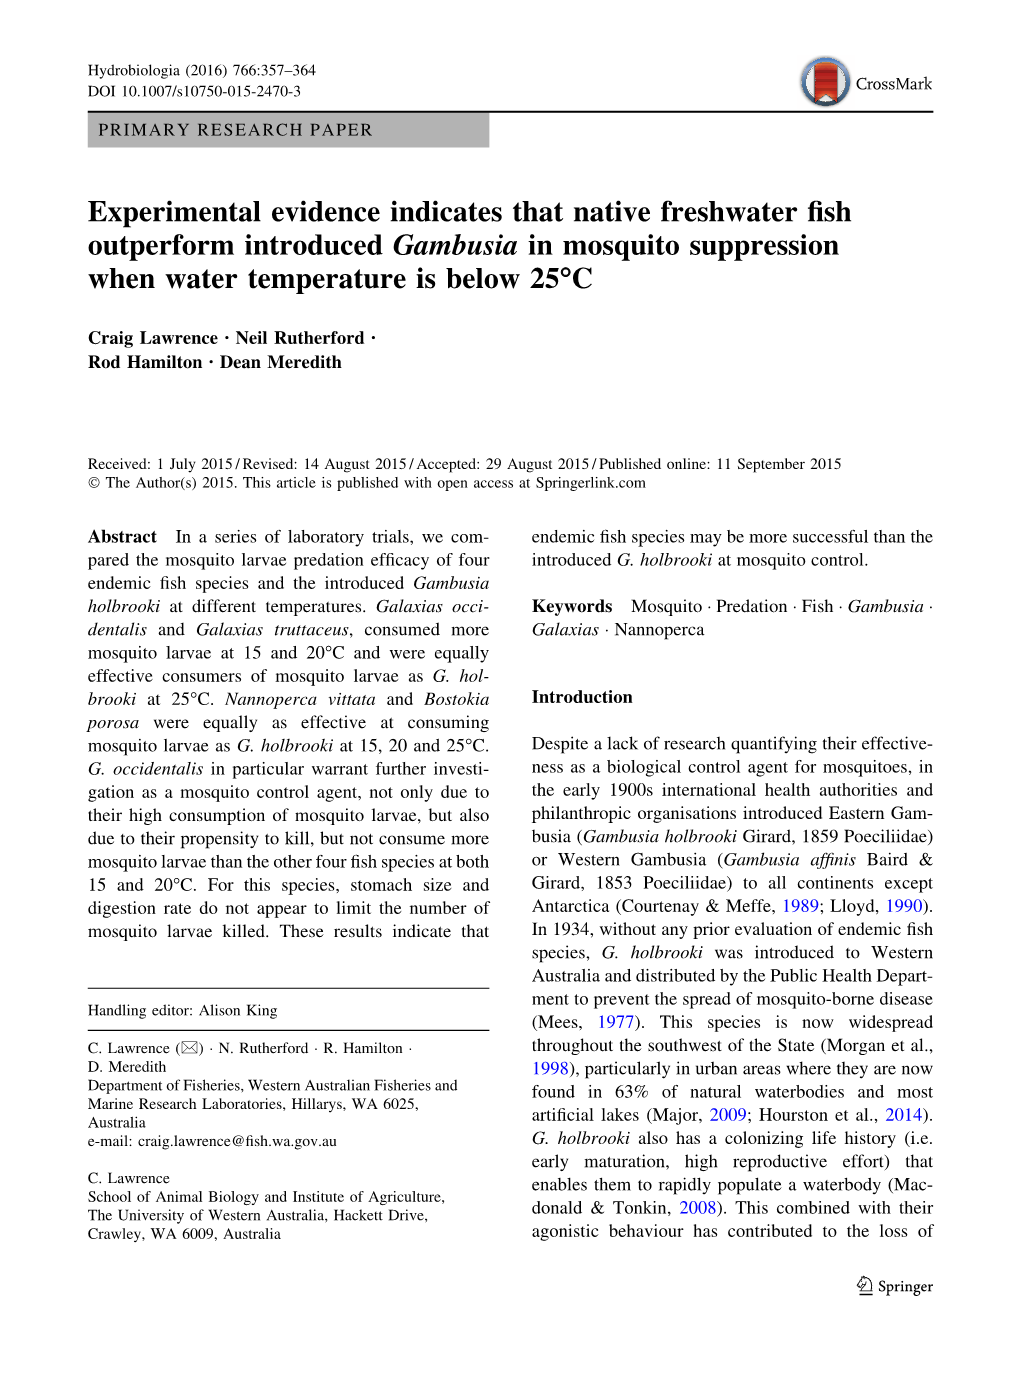 Experimental Evidence Indicates That Native Freshwater Fish Outperform